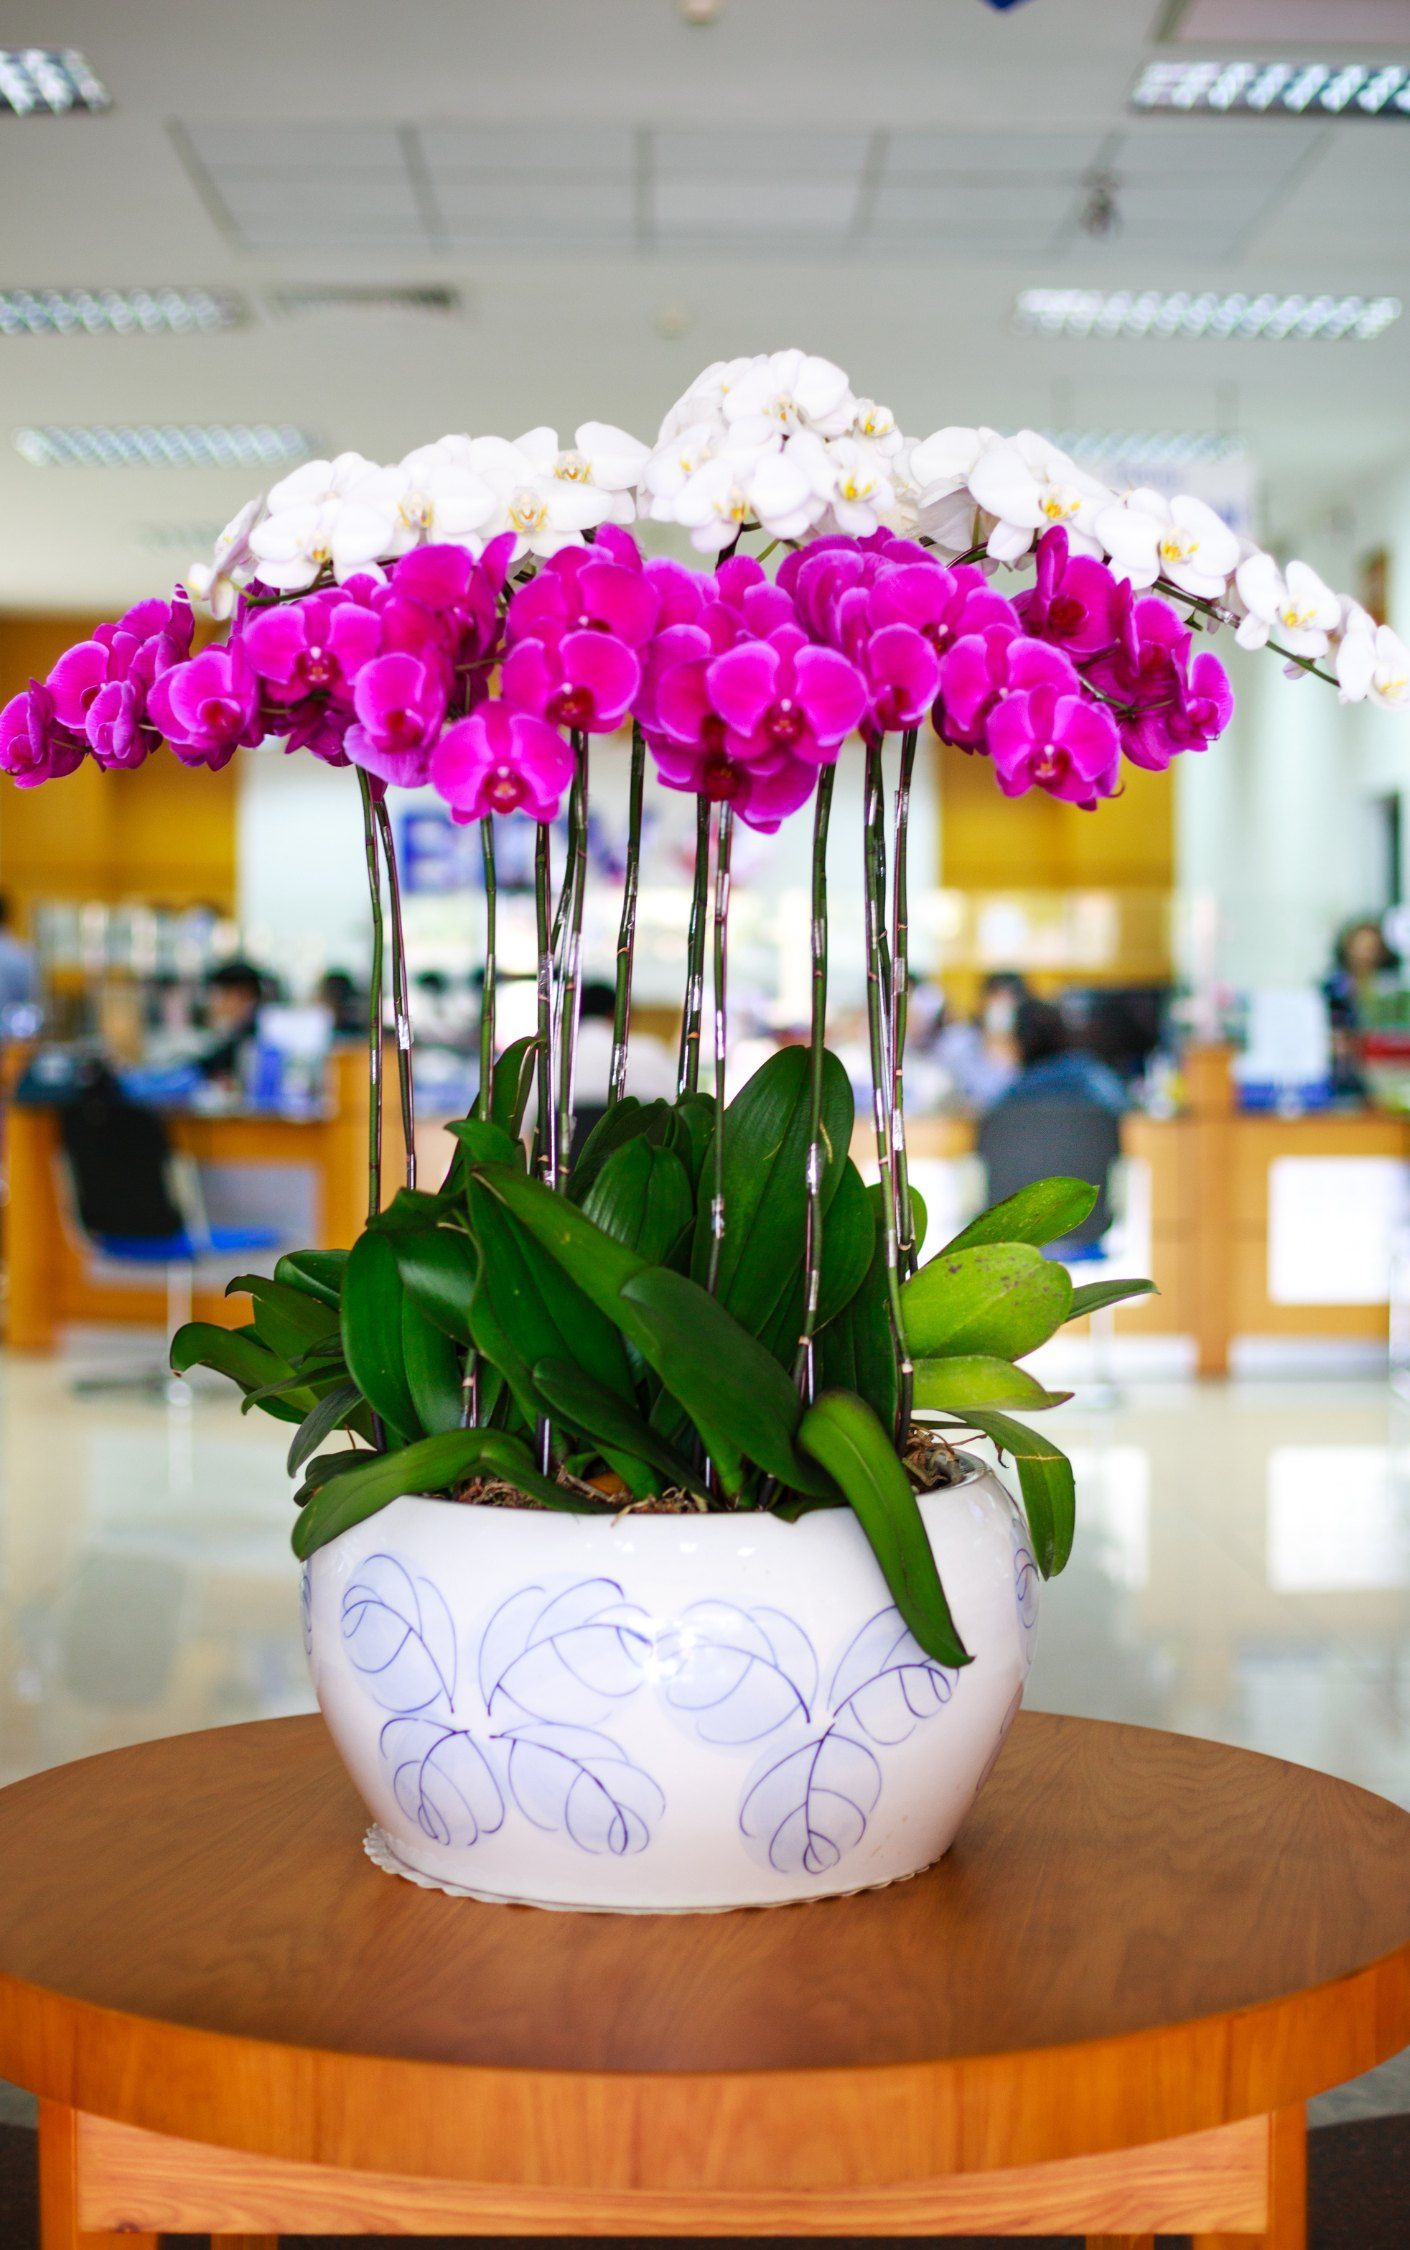  Keeping Your Orchids Blooming for Longer